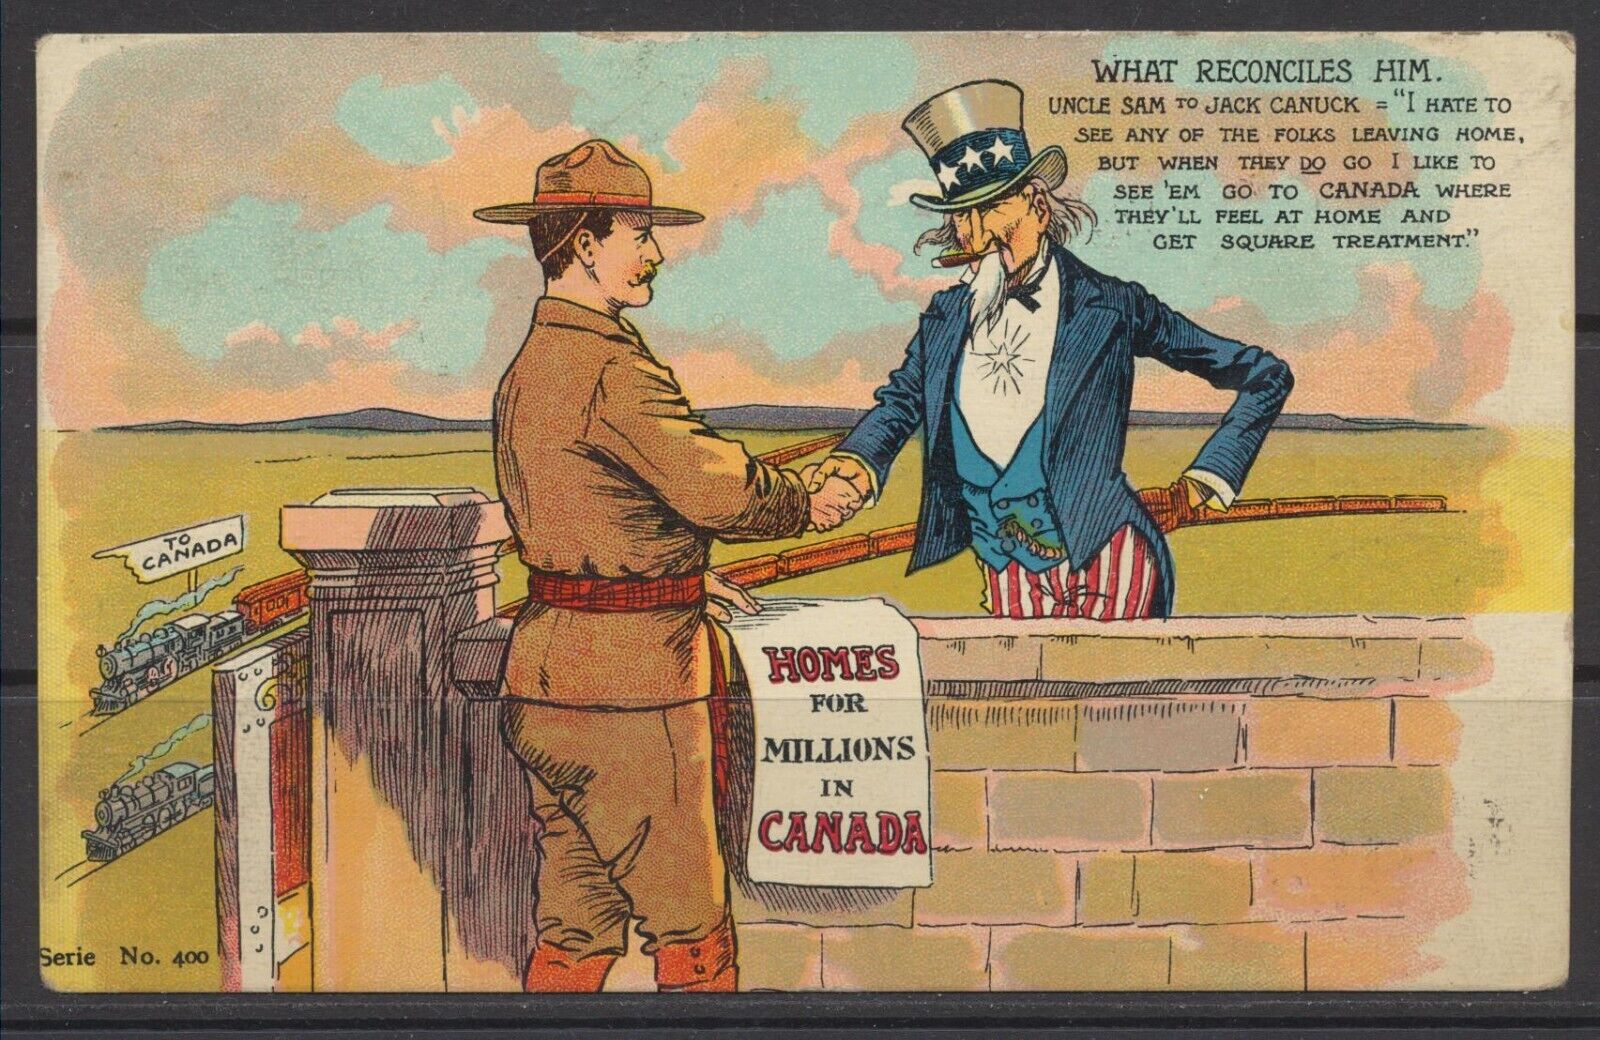 1906 Canada ~ What Reconciles Him ~ Homes For Millions ~ Uncle Sam & Jack Canuck